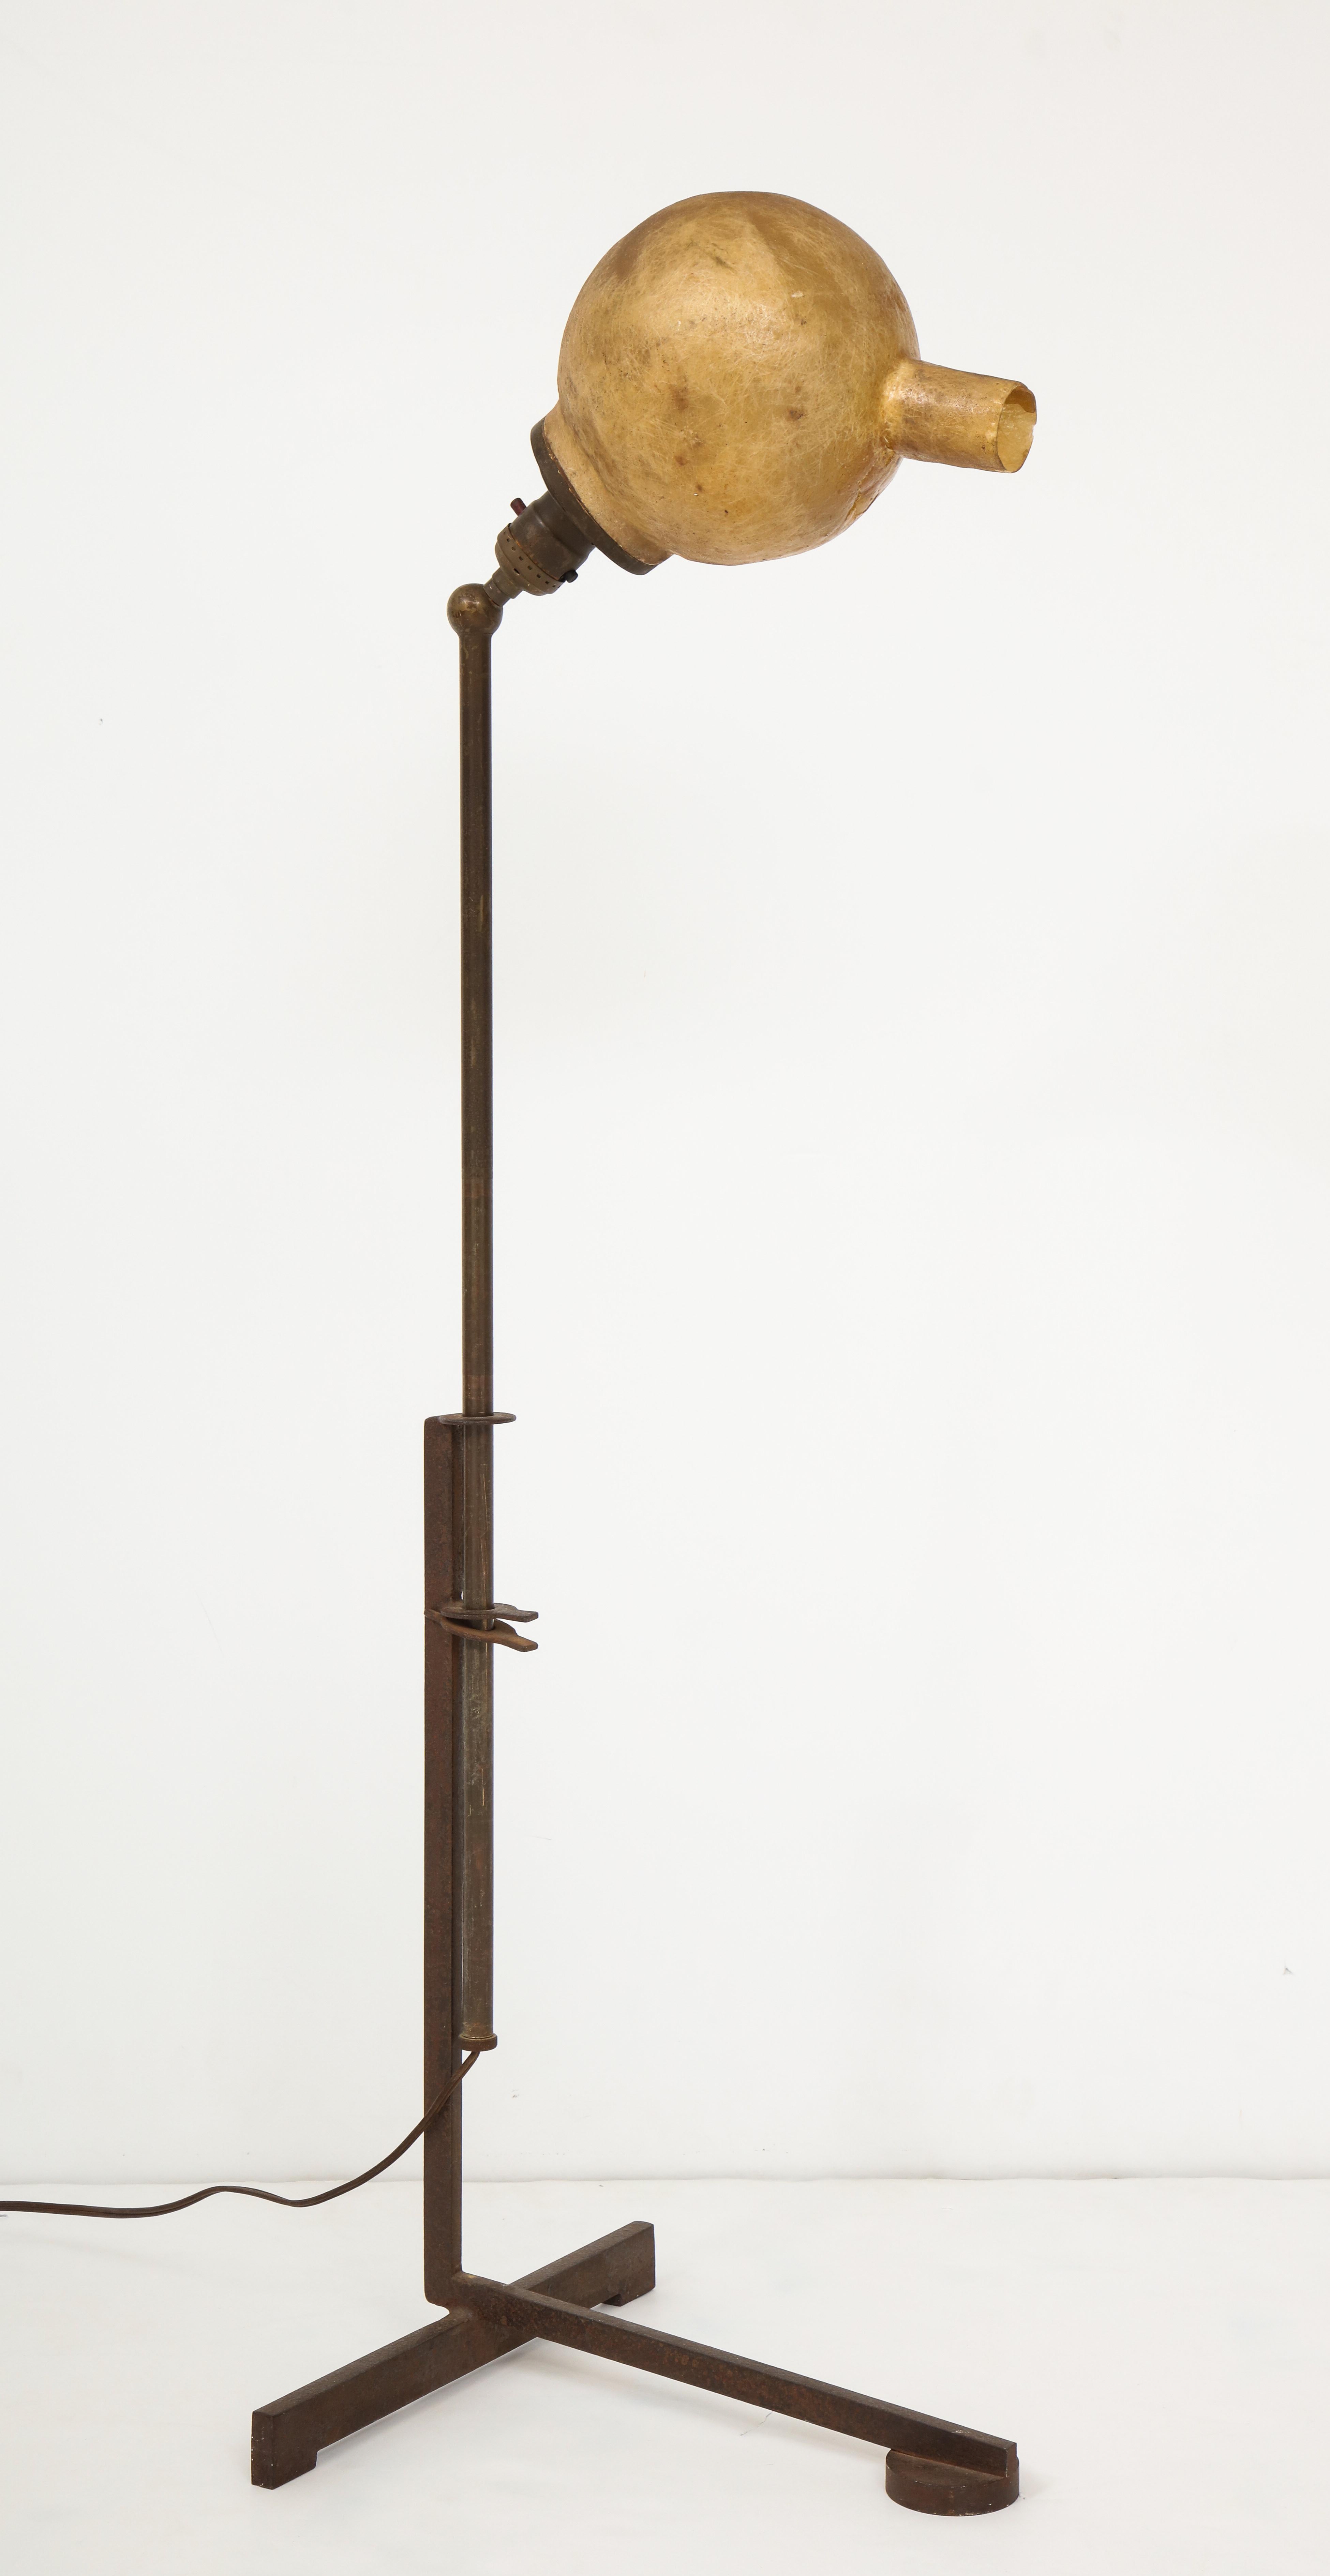 Adjustable (up-and-down and pivoting) floor lamp with a Constructivist iron base surmounted by a quirky, almost anthropomorphic hand-molded fiberglass diffuser–an early use of fiberglass in product design. A one-off by Ross Bellah, made in the